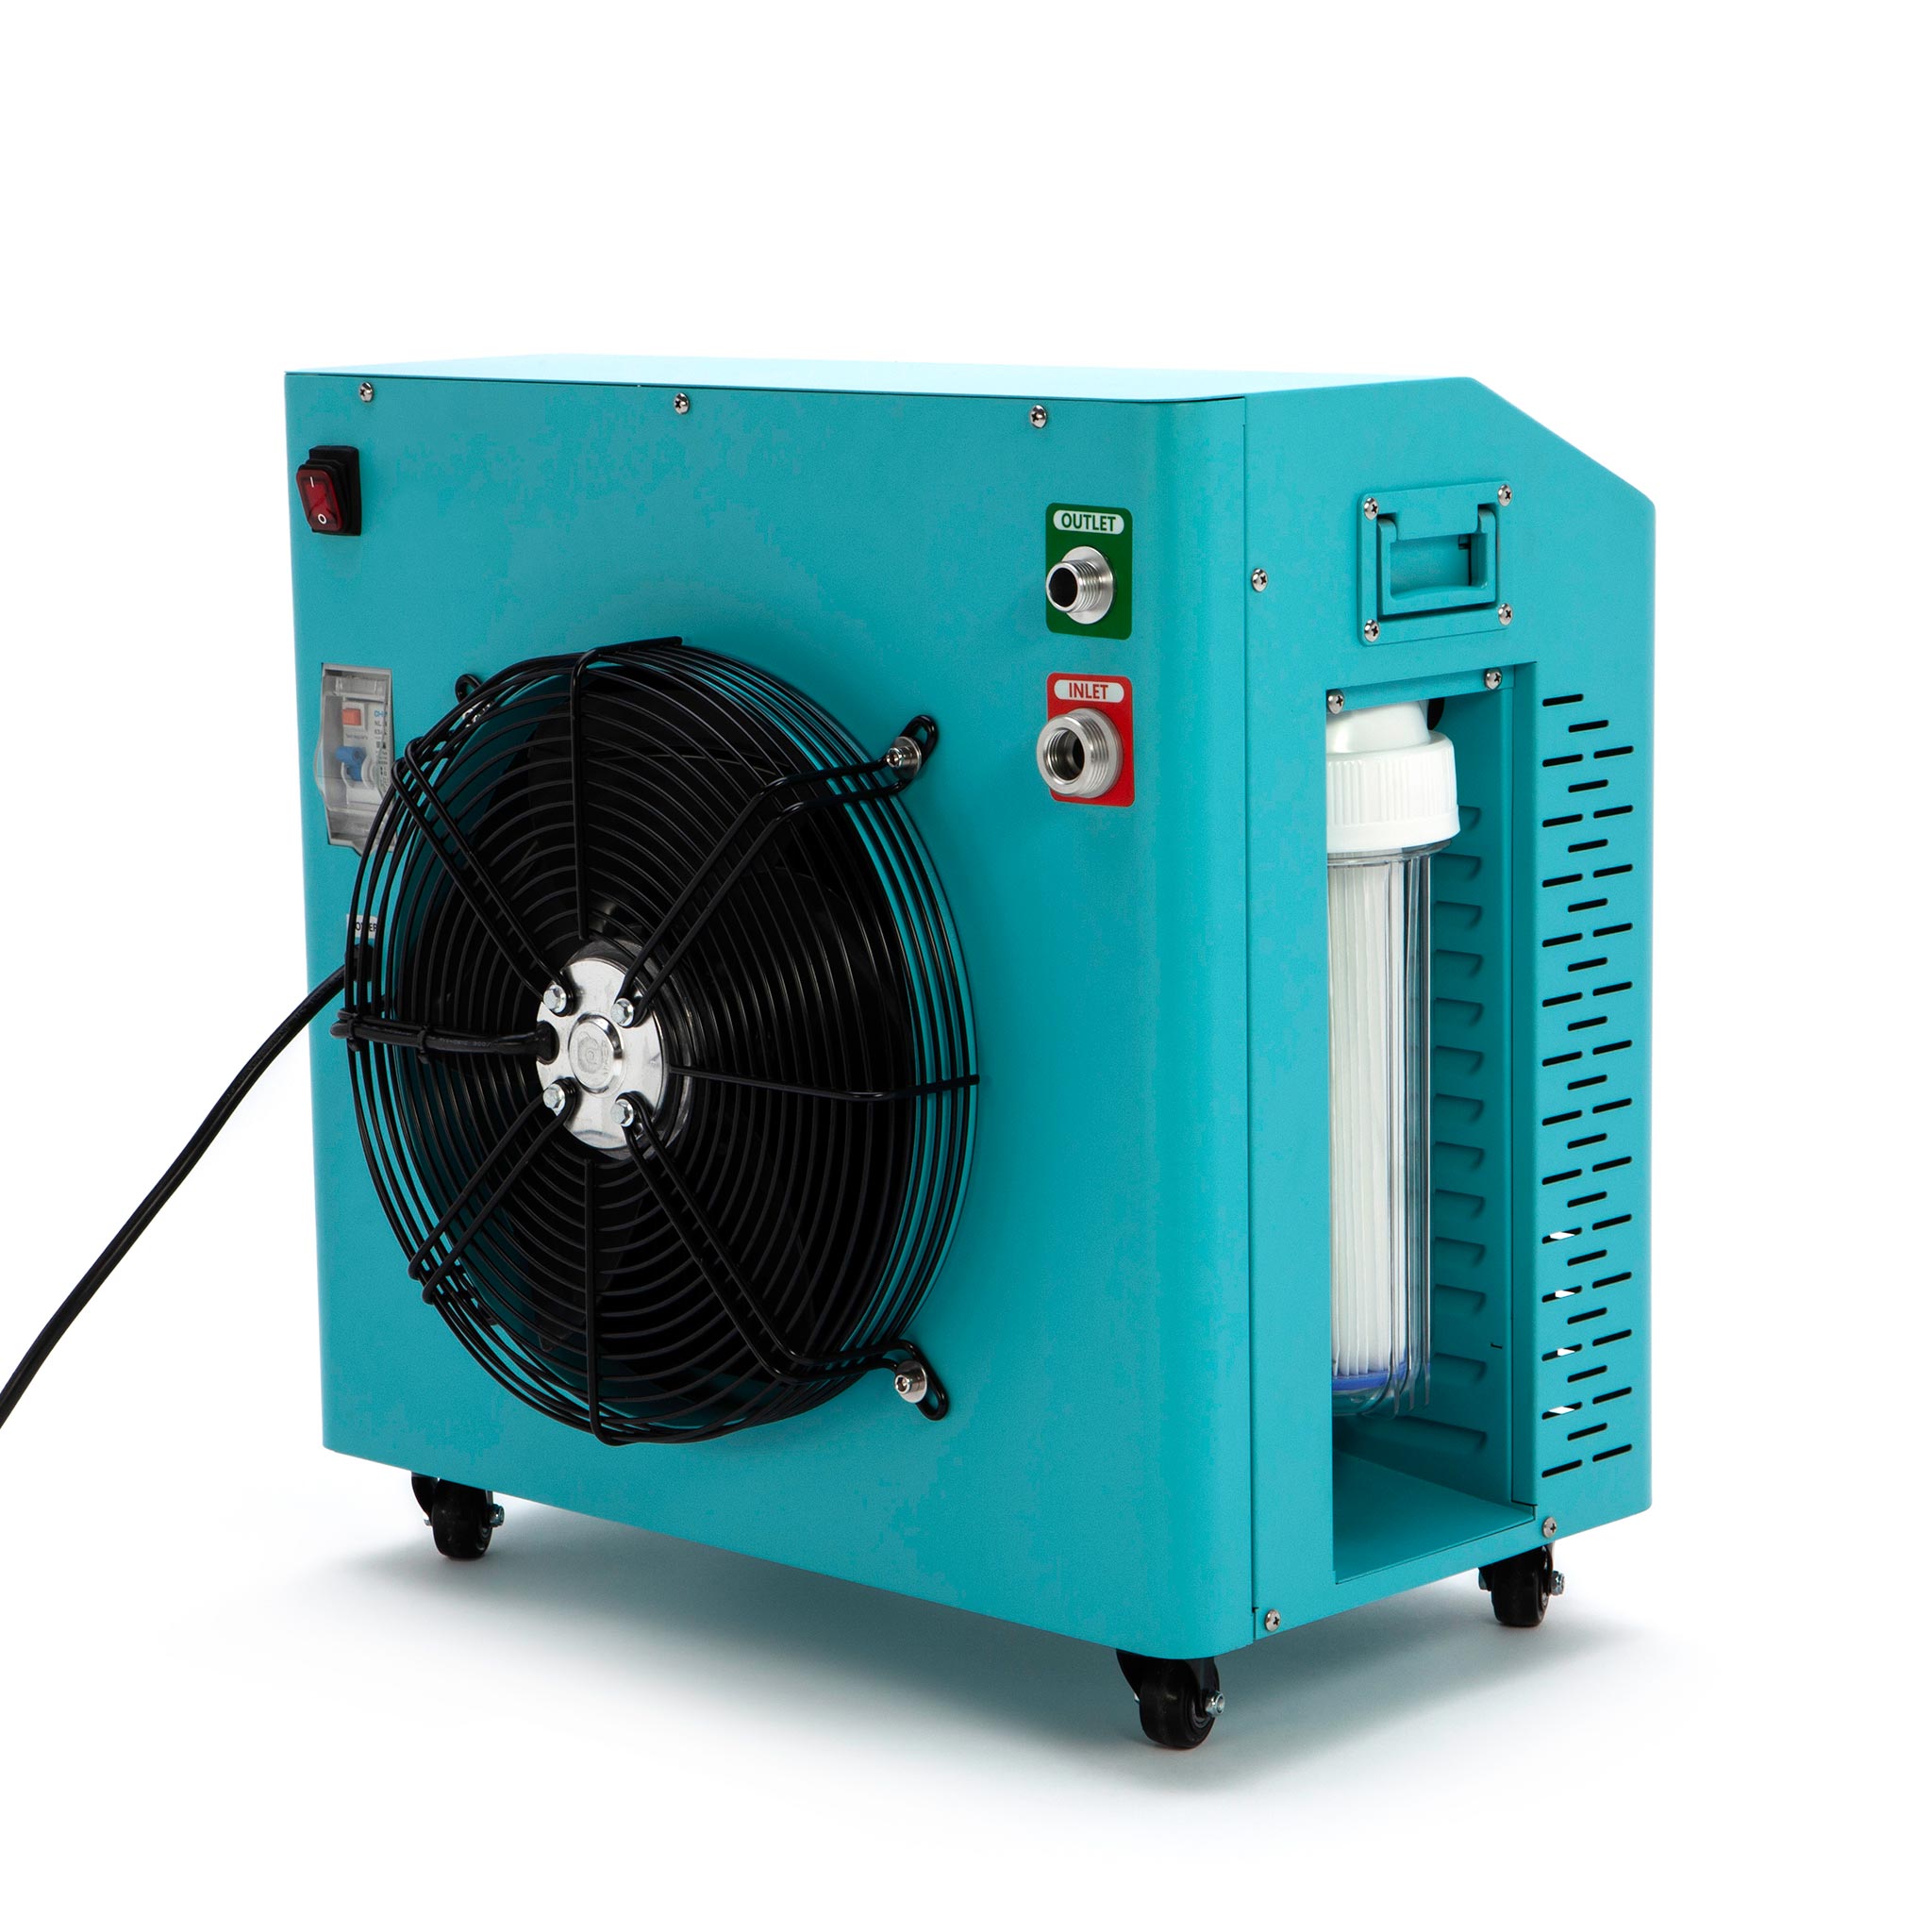 A blue CRYOSPRING machine with a fan attached to it, designed for Cryospring Cold + Hot Plunge System and recovery routine.